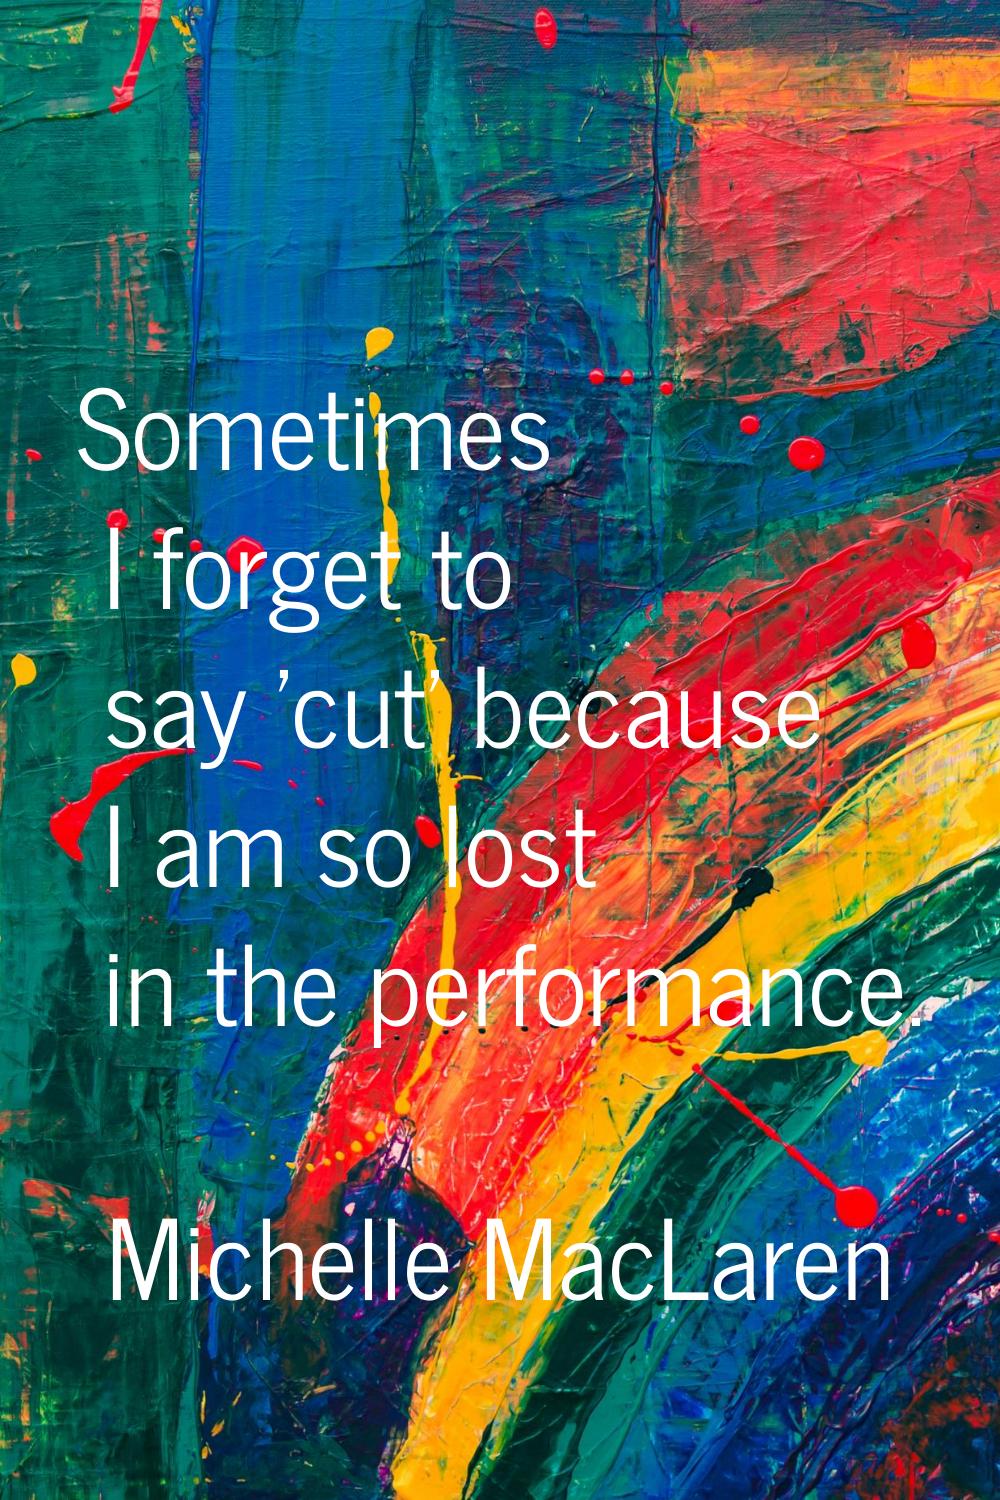 Sometimes I forget to say 'cut' because I am so lost in the performance.